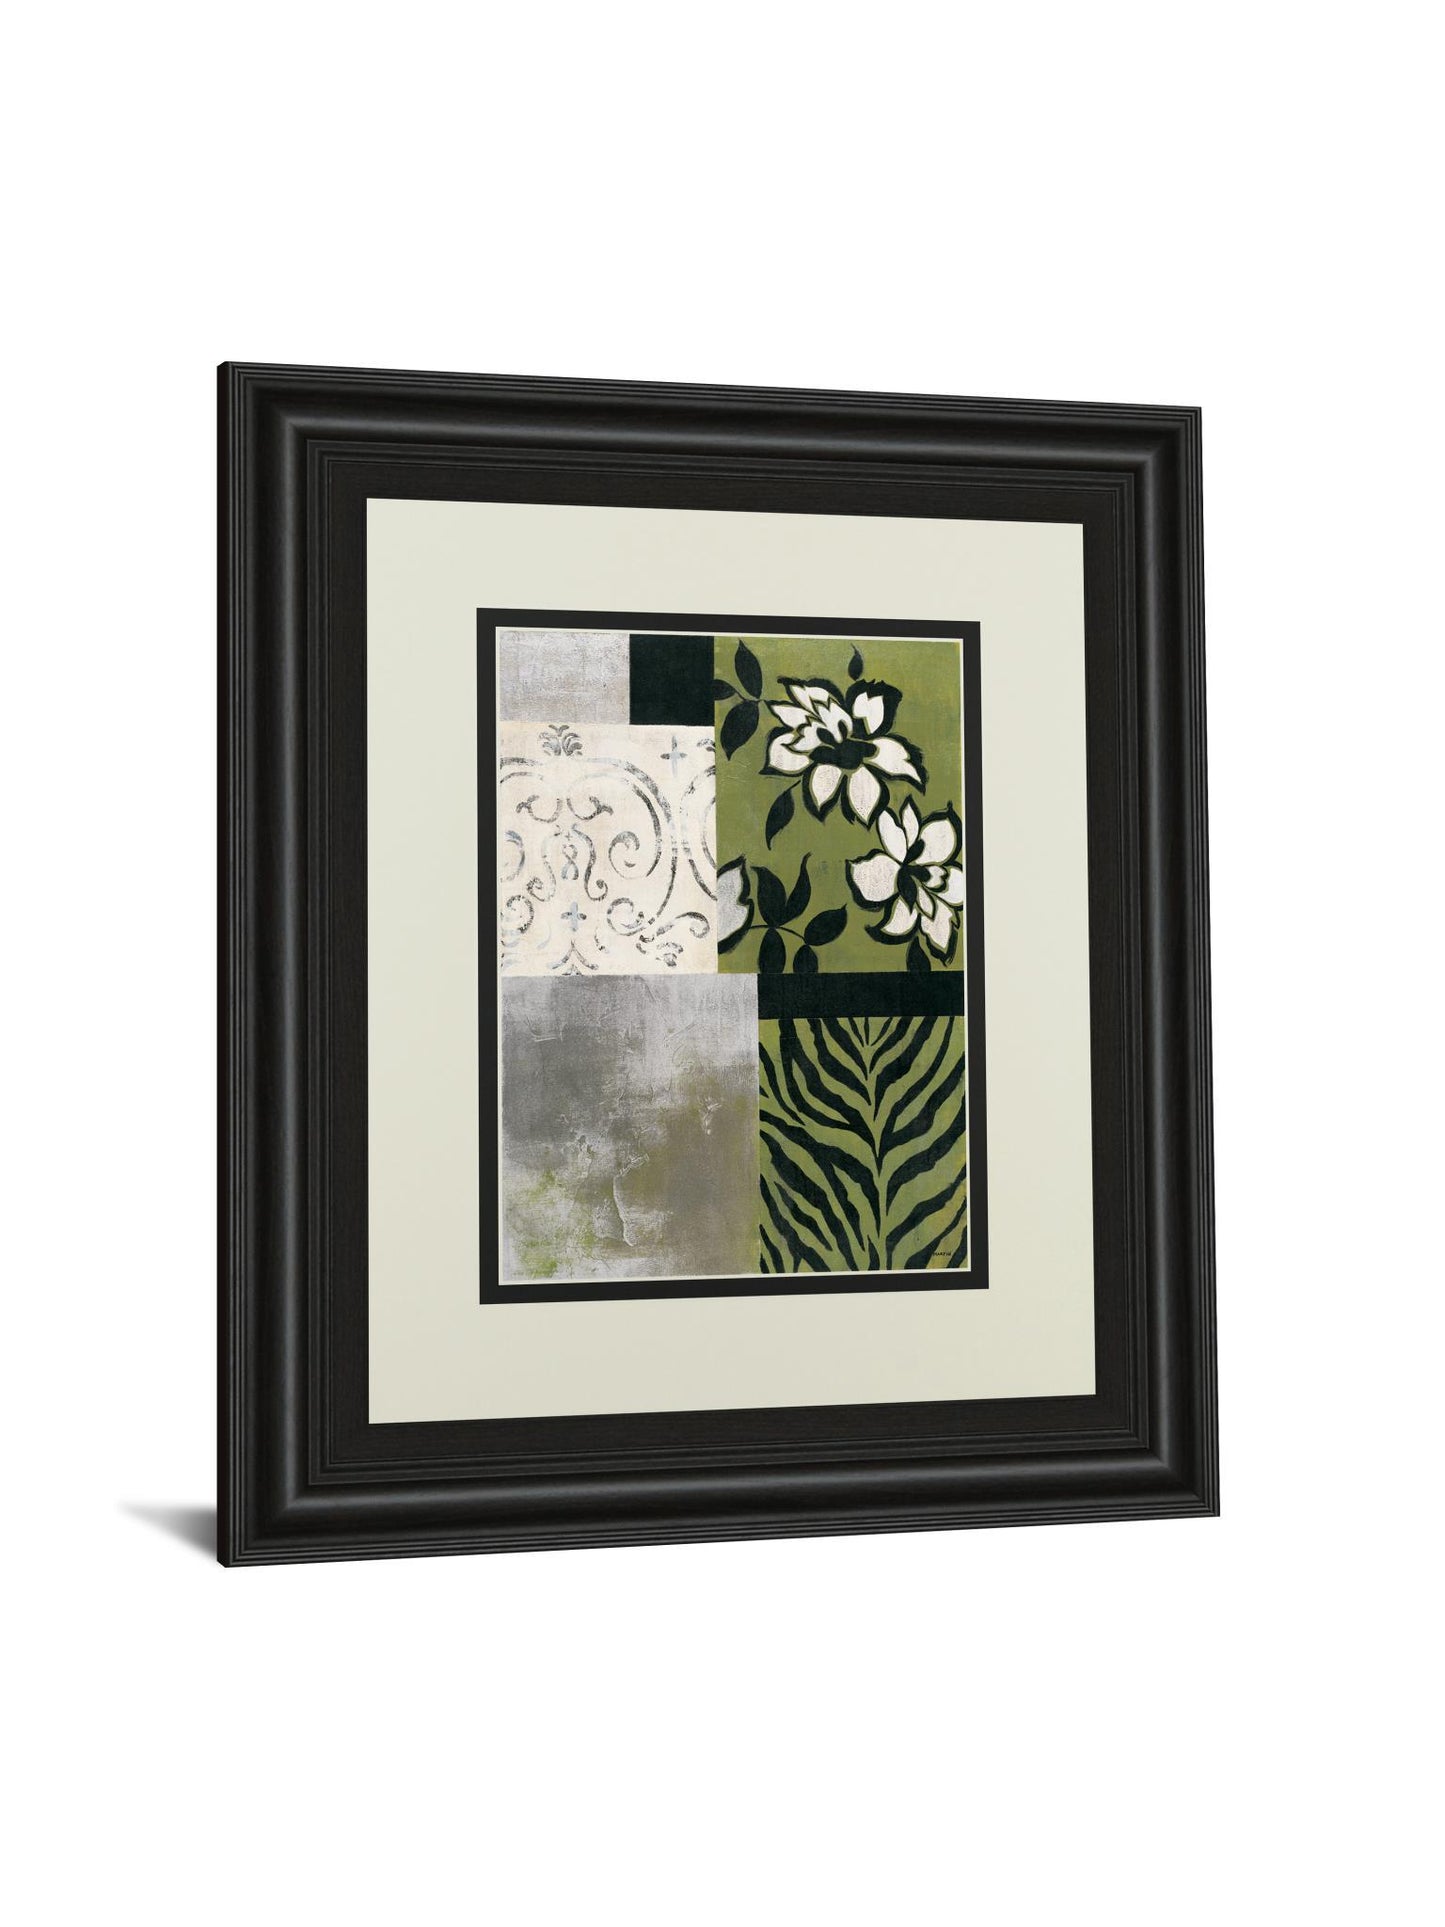 Playing With Patterns Il By Cheryl Martin - Framed Print Wall Art - Green